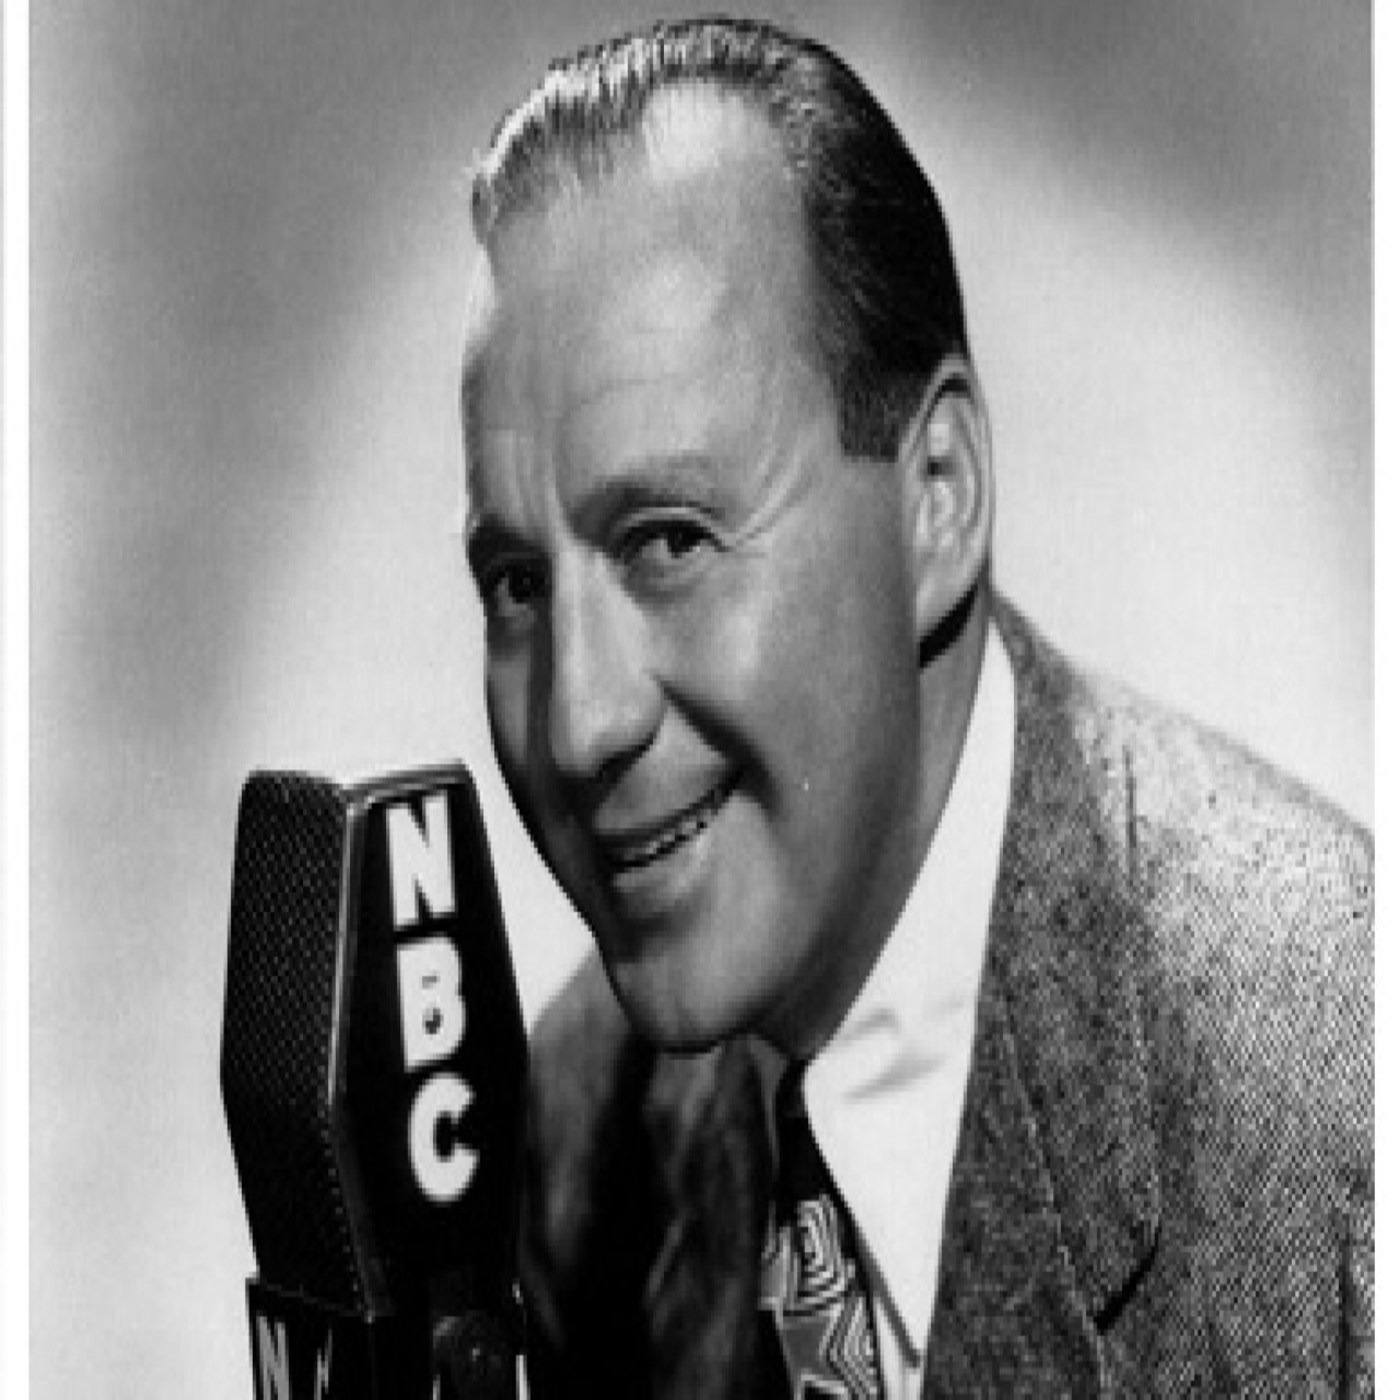 Jack Benny 55-01-23 (907) At the Race Track